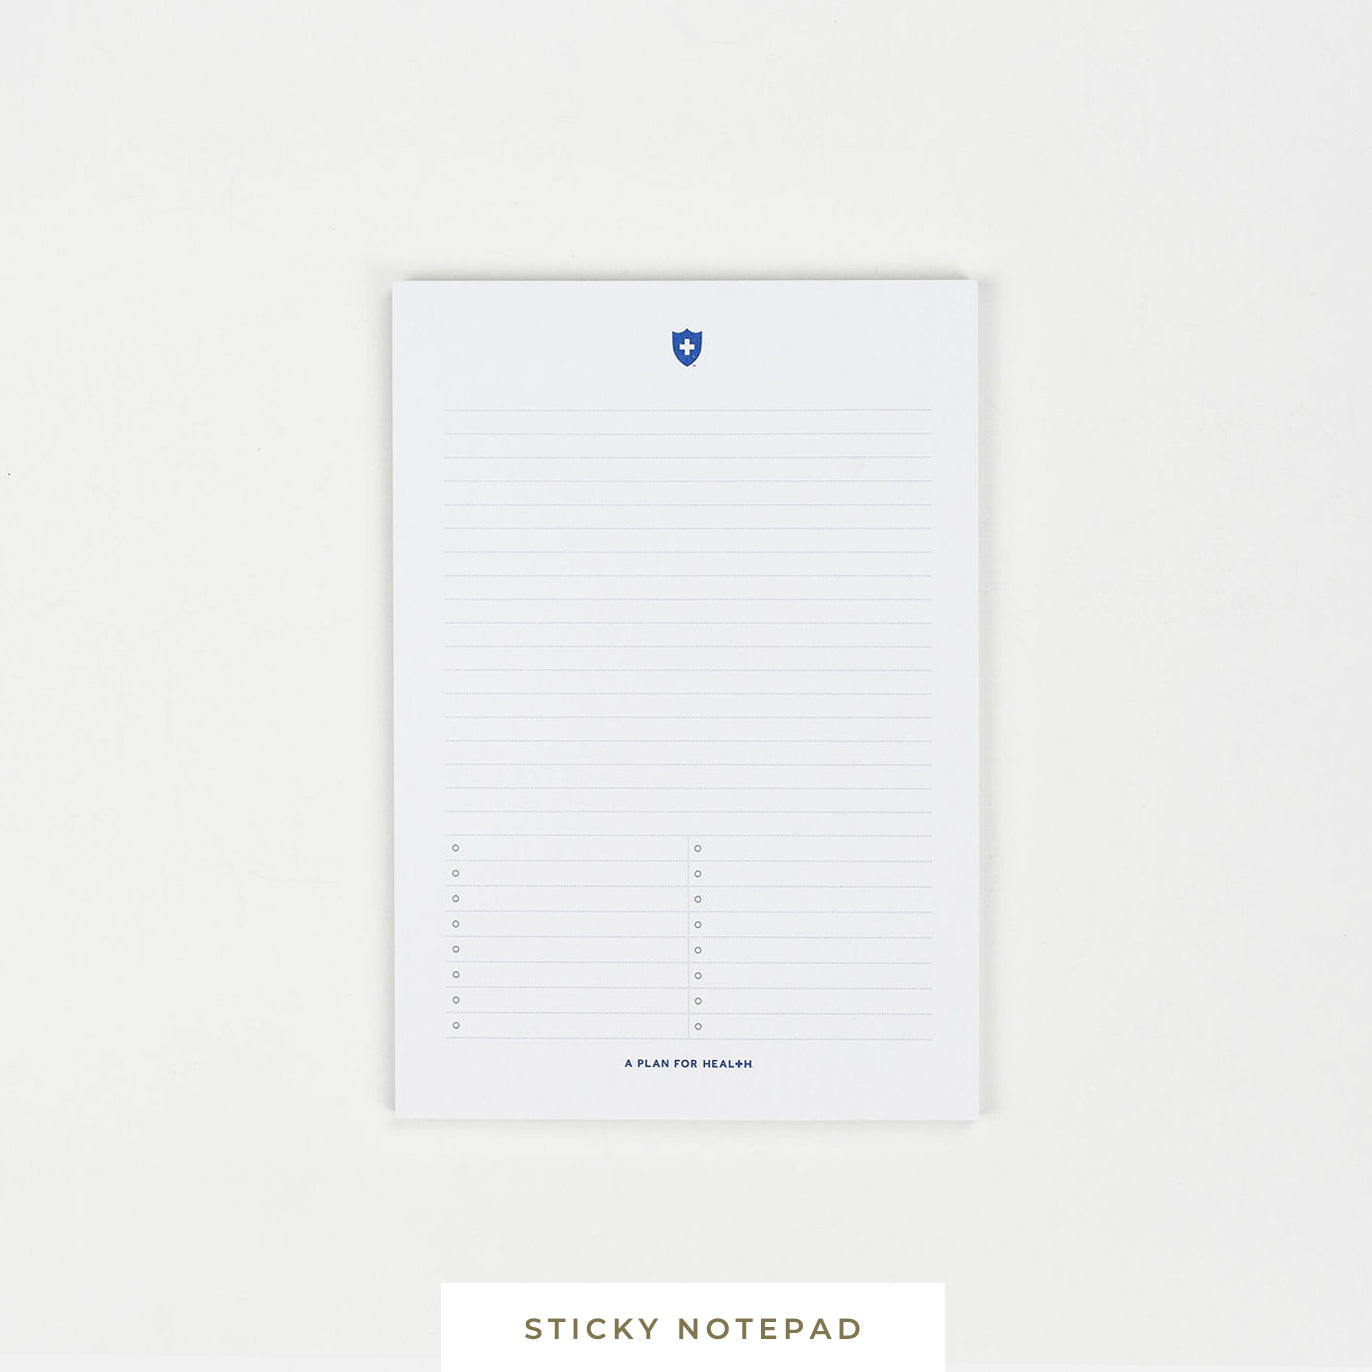 Notepad • Sticky • A Plan for Health